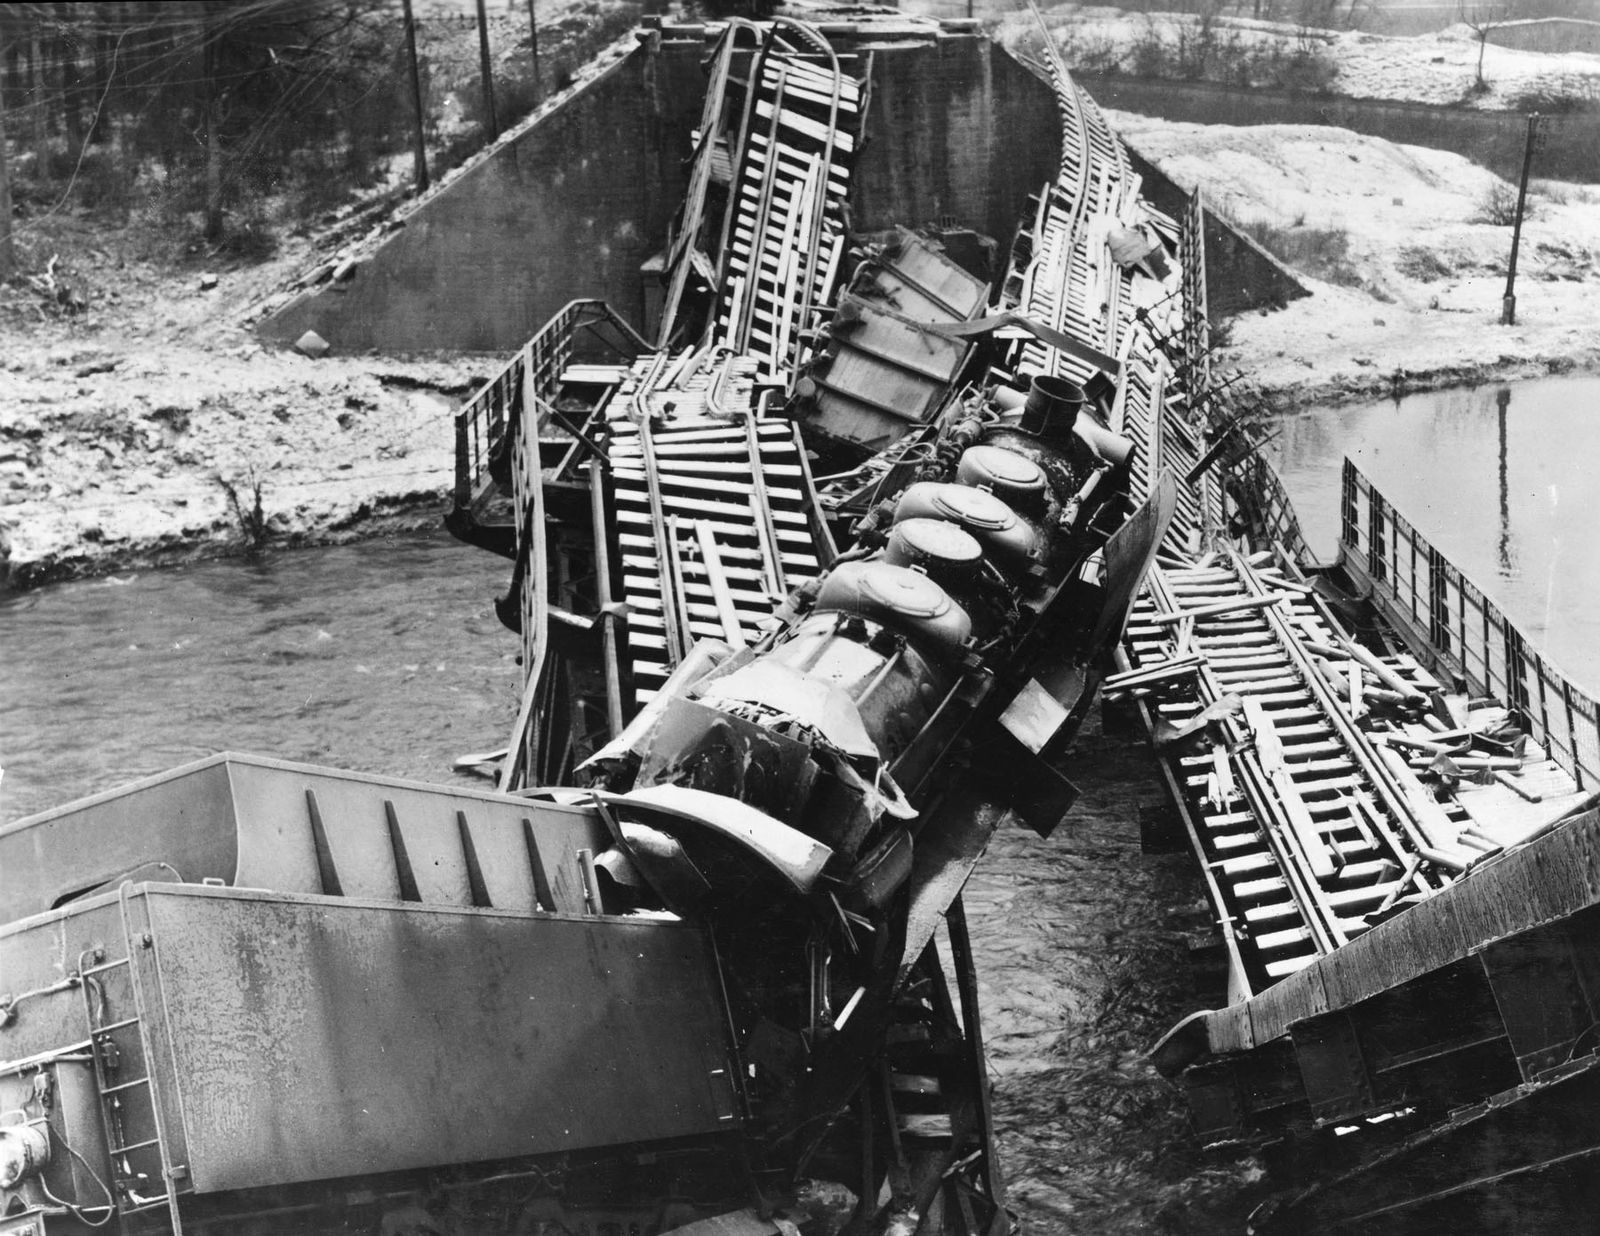 Train wreck, the Moselle River, Germany, 1944